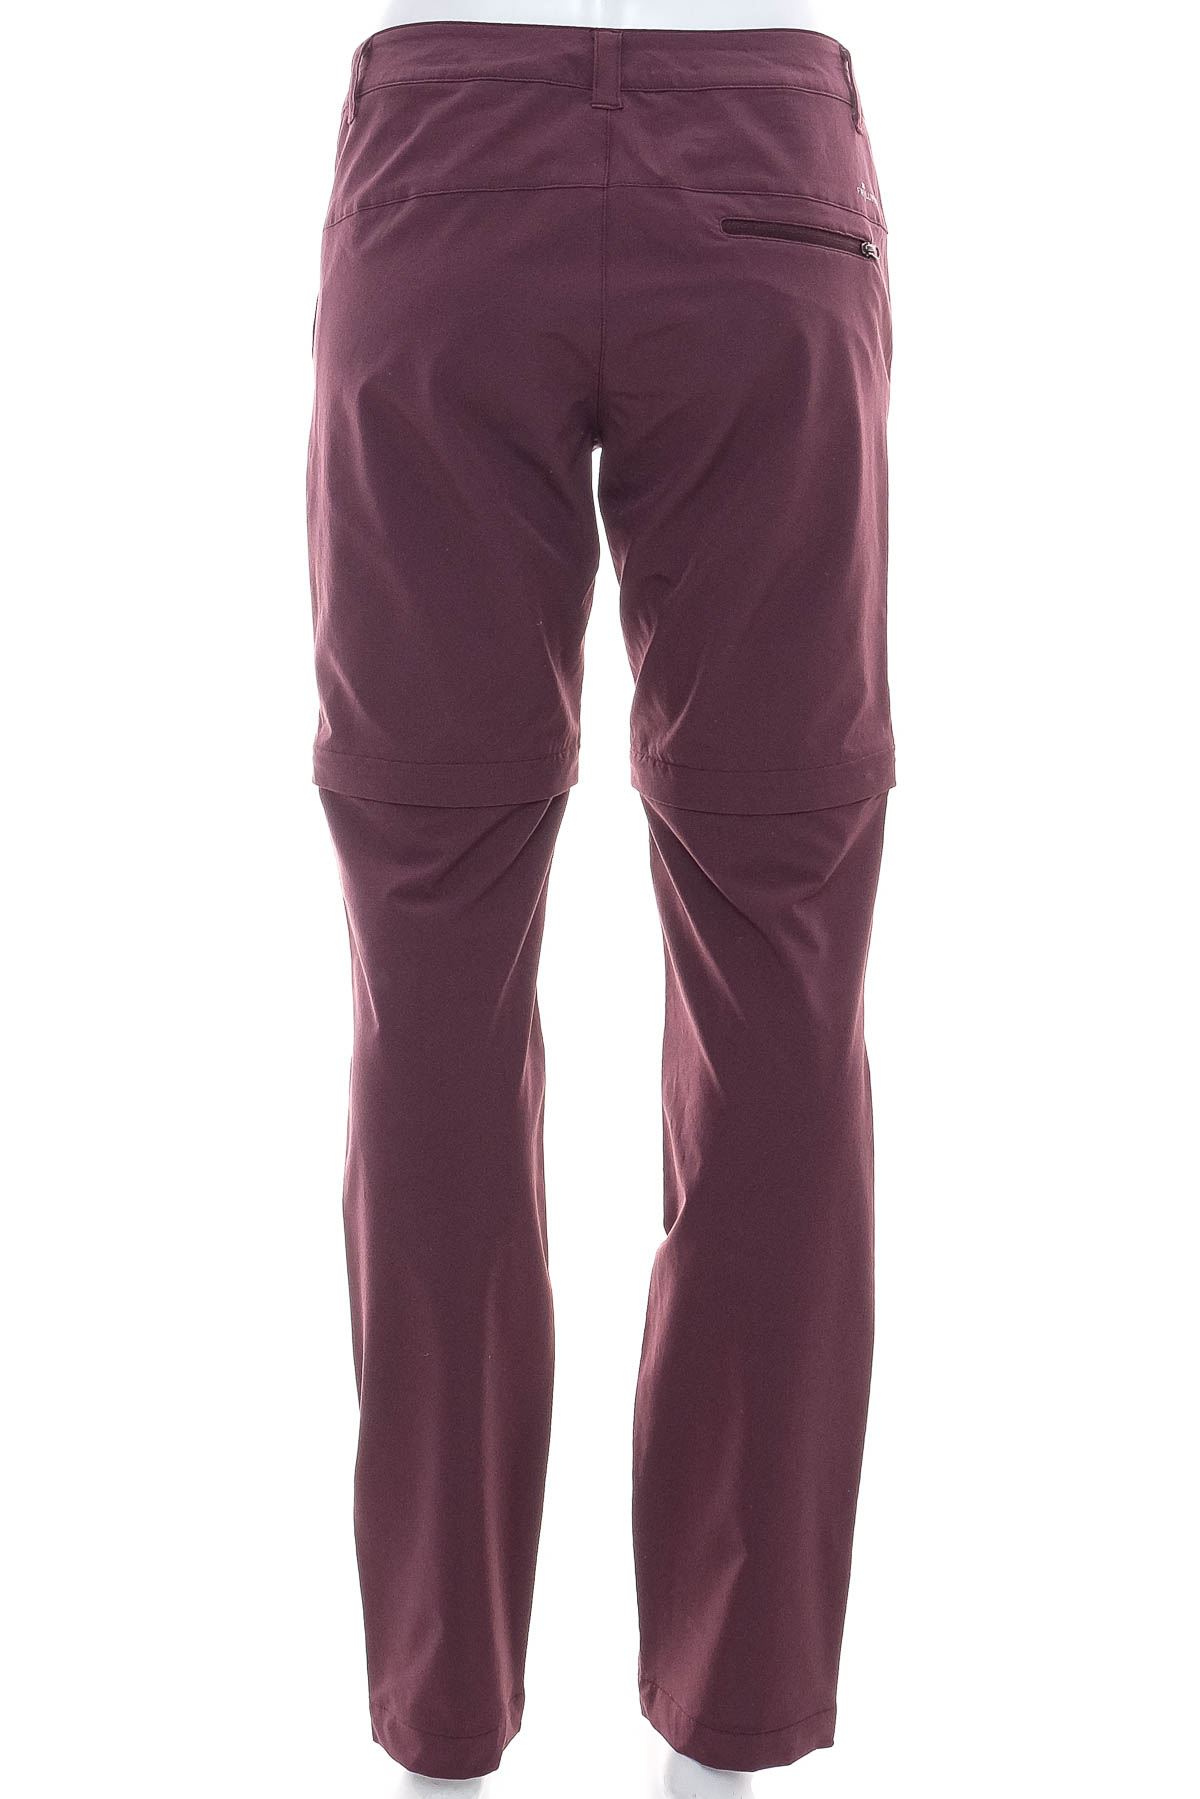 Trousers for girl - FRILUFTS - 1